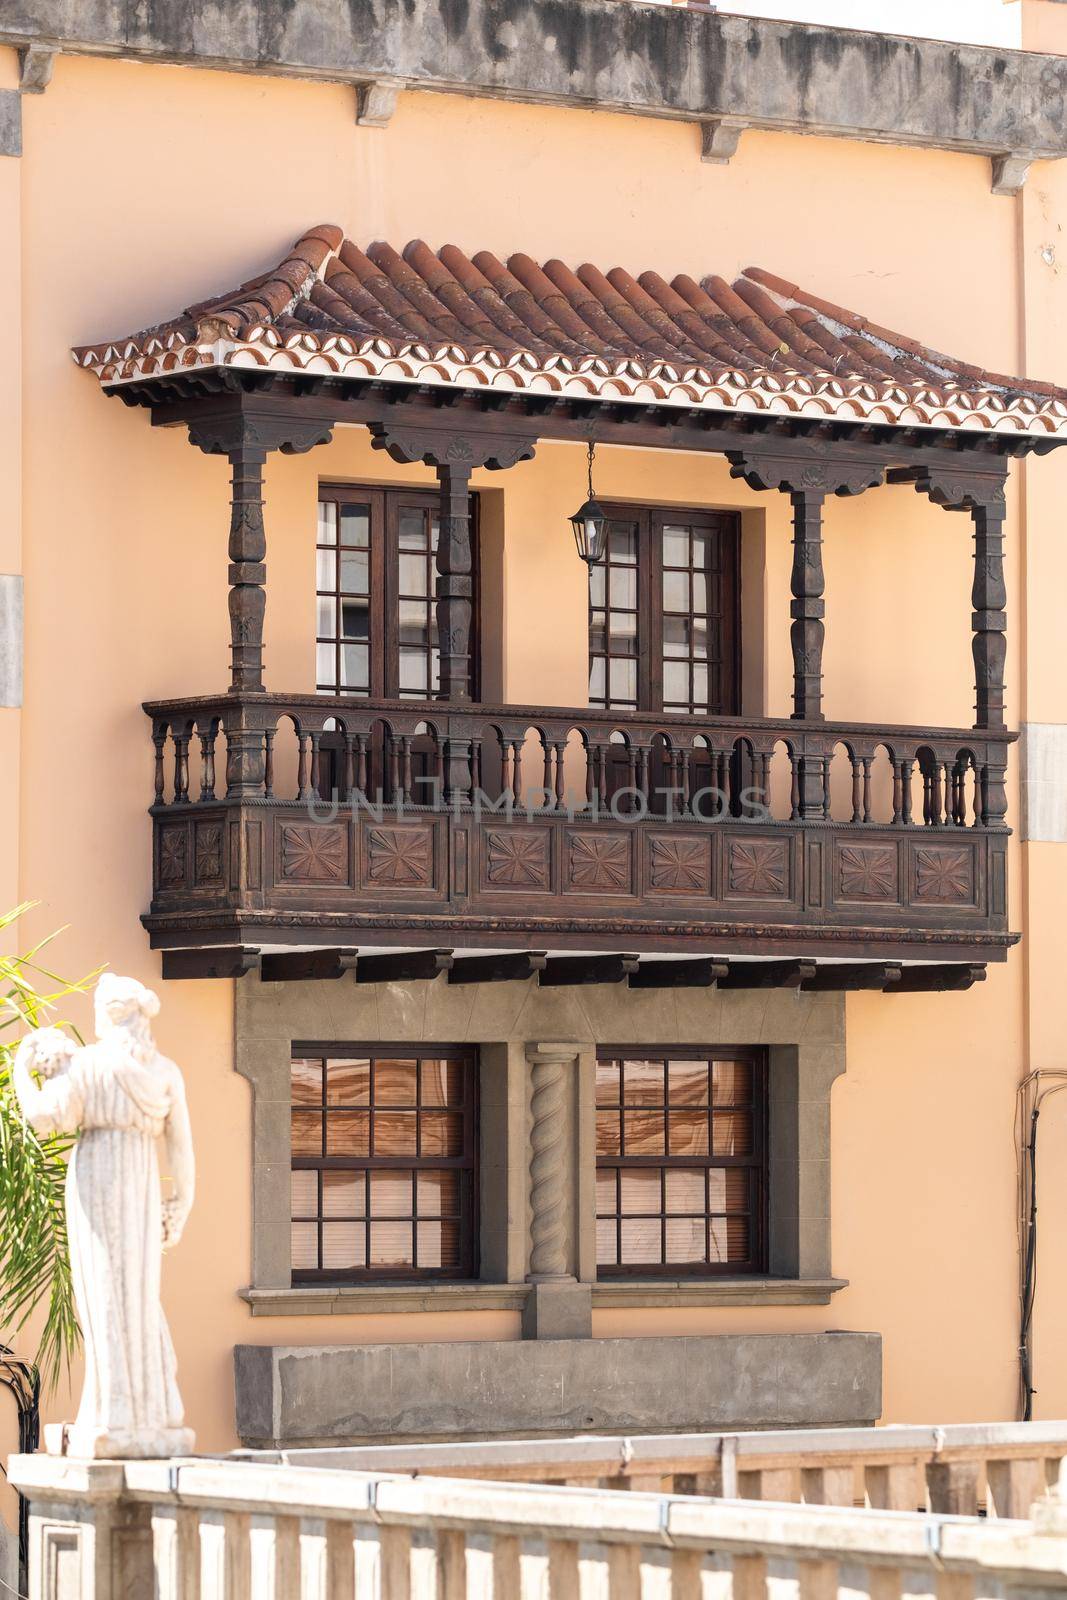 Beautiful old wooden balcony on the island of Tenerife in the Canary Islands.Spain by Lobachad